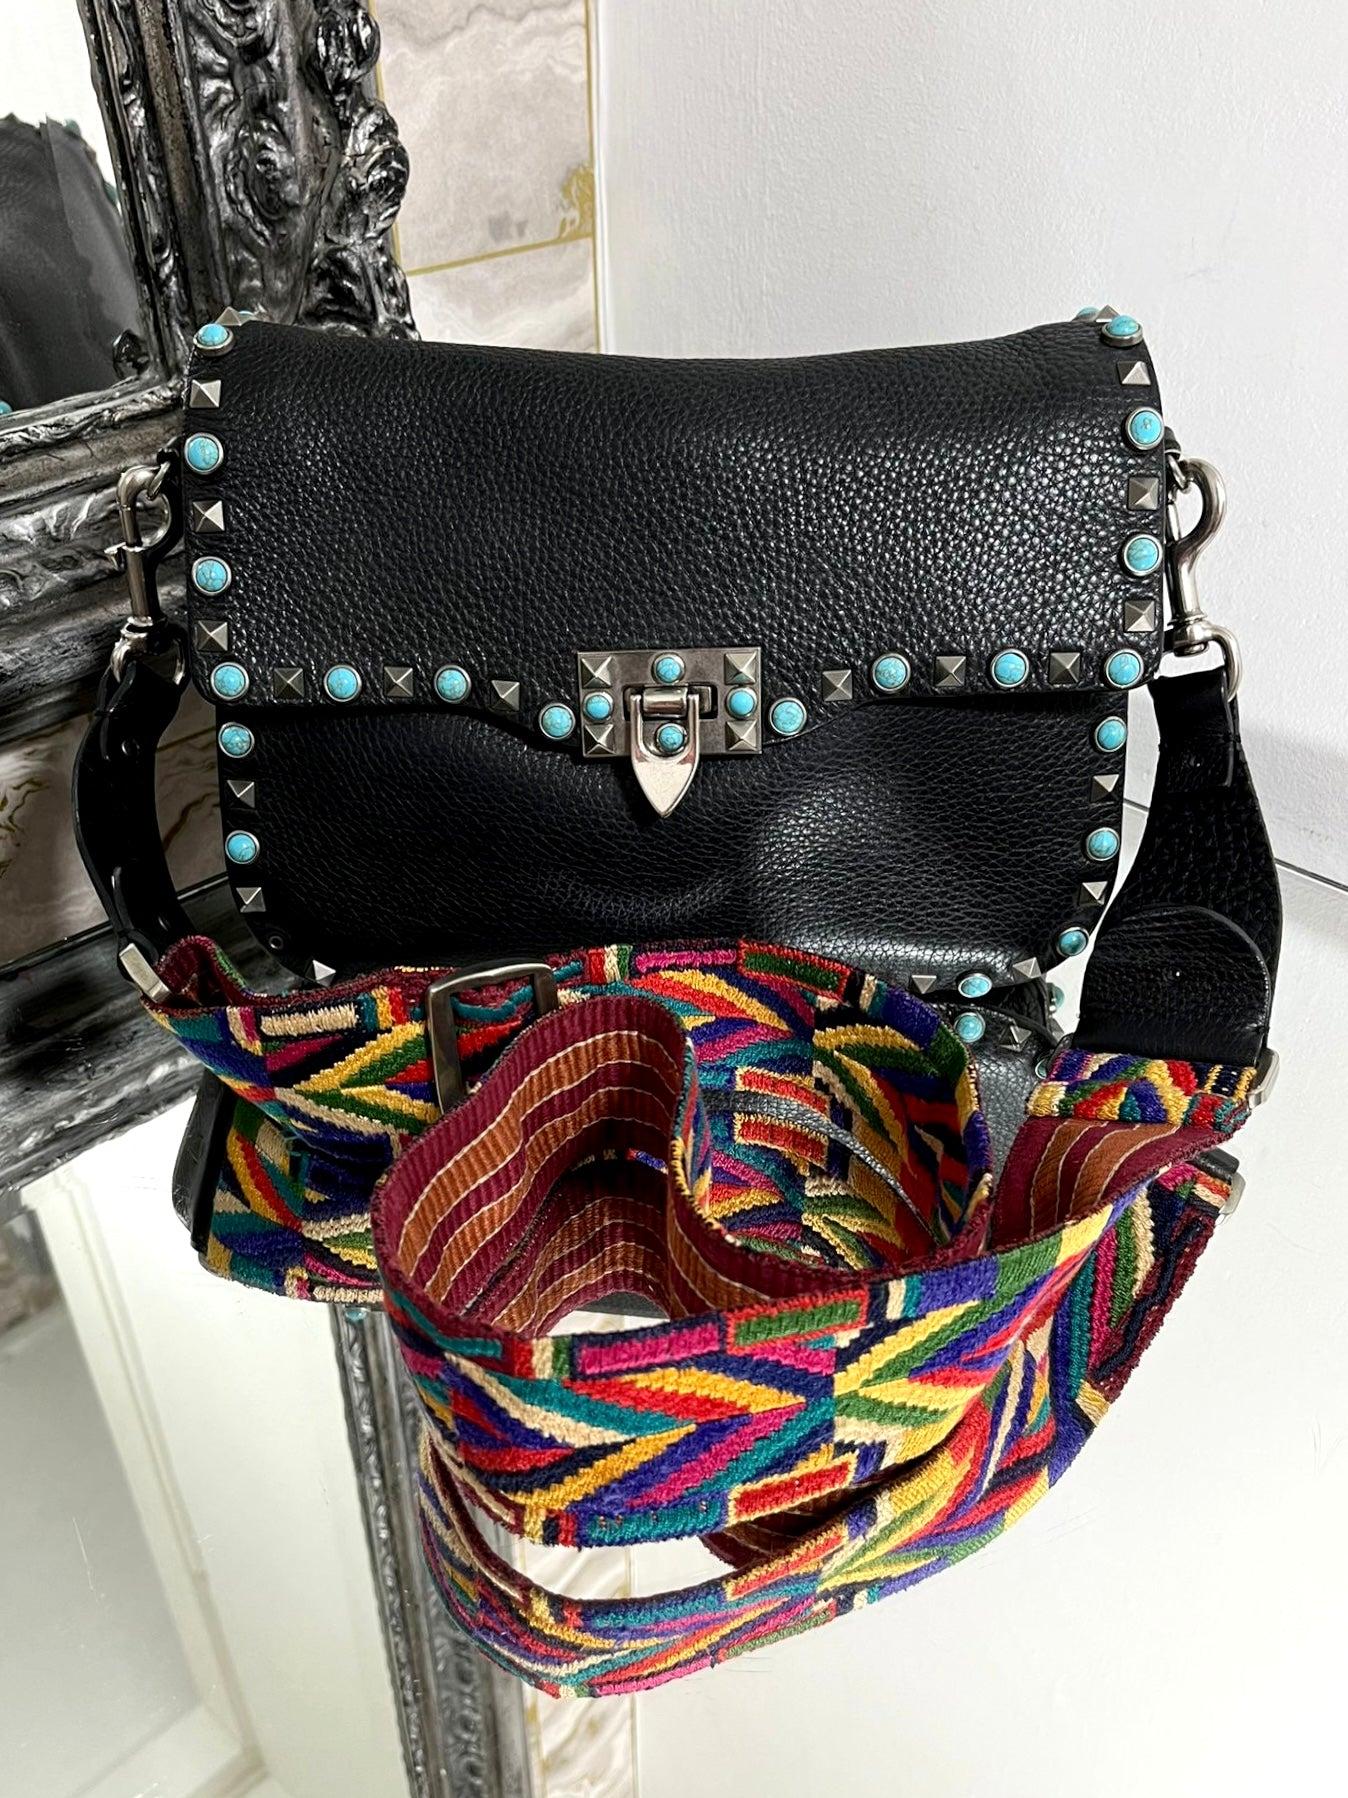 Valentino Leather Guitar Rockstud Bag

Black soft leather, crossbody bag with turquoise beading and the signature

rockstuds. Multicoloured embroidered guitar style, removable should strap.

Rrp approx £2,700.

Size - Height 19cm, Width 26cm, Depth